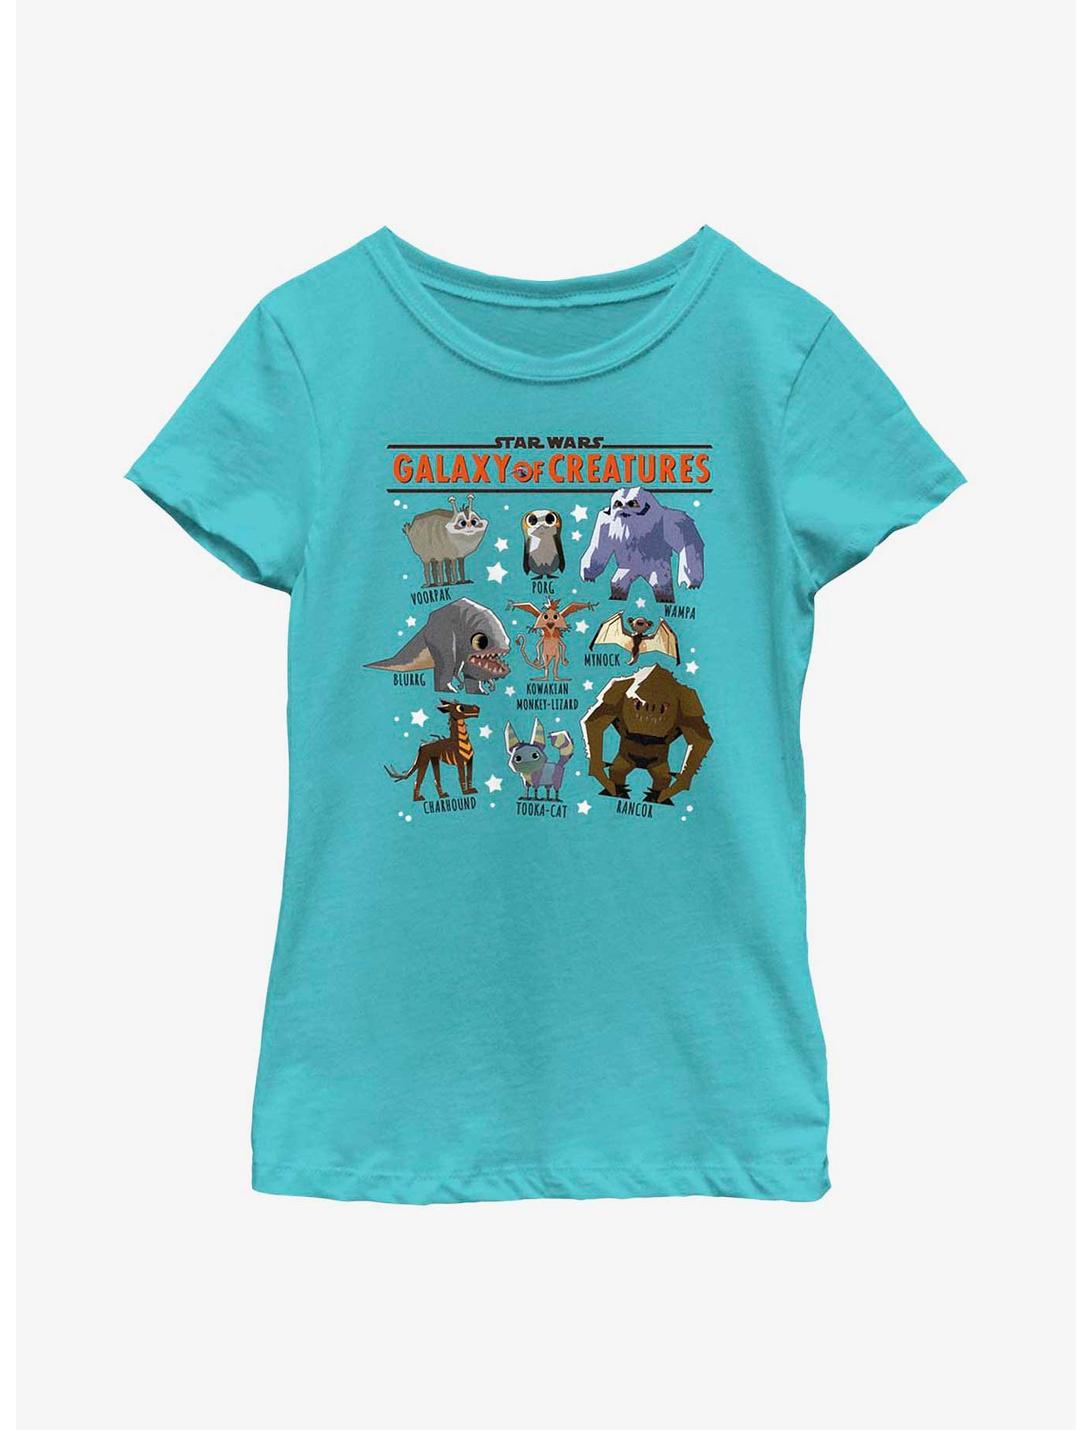 Star Wars Galaxy Of Creatures Creature Textbook Youth Girls T-Shirt, TAHI BLUE, hi-res